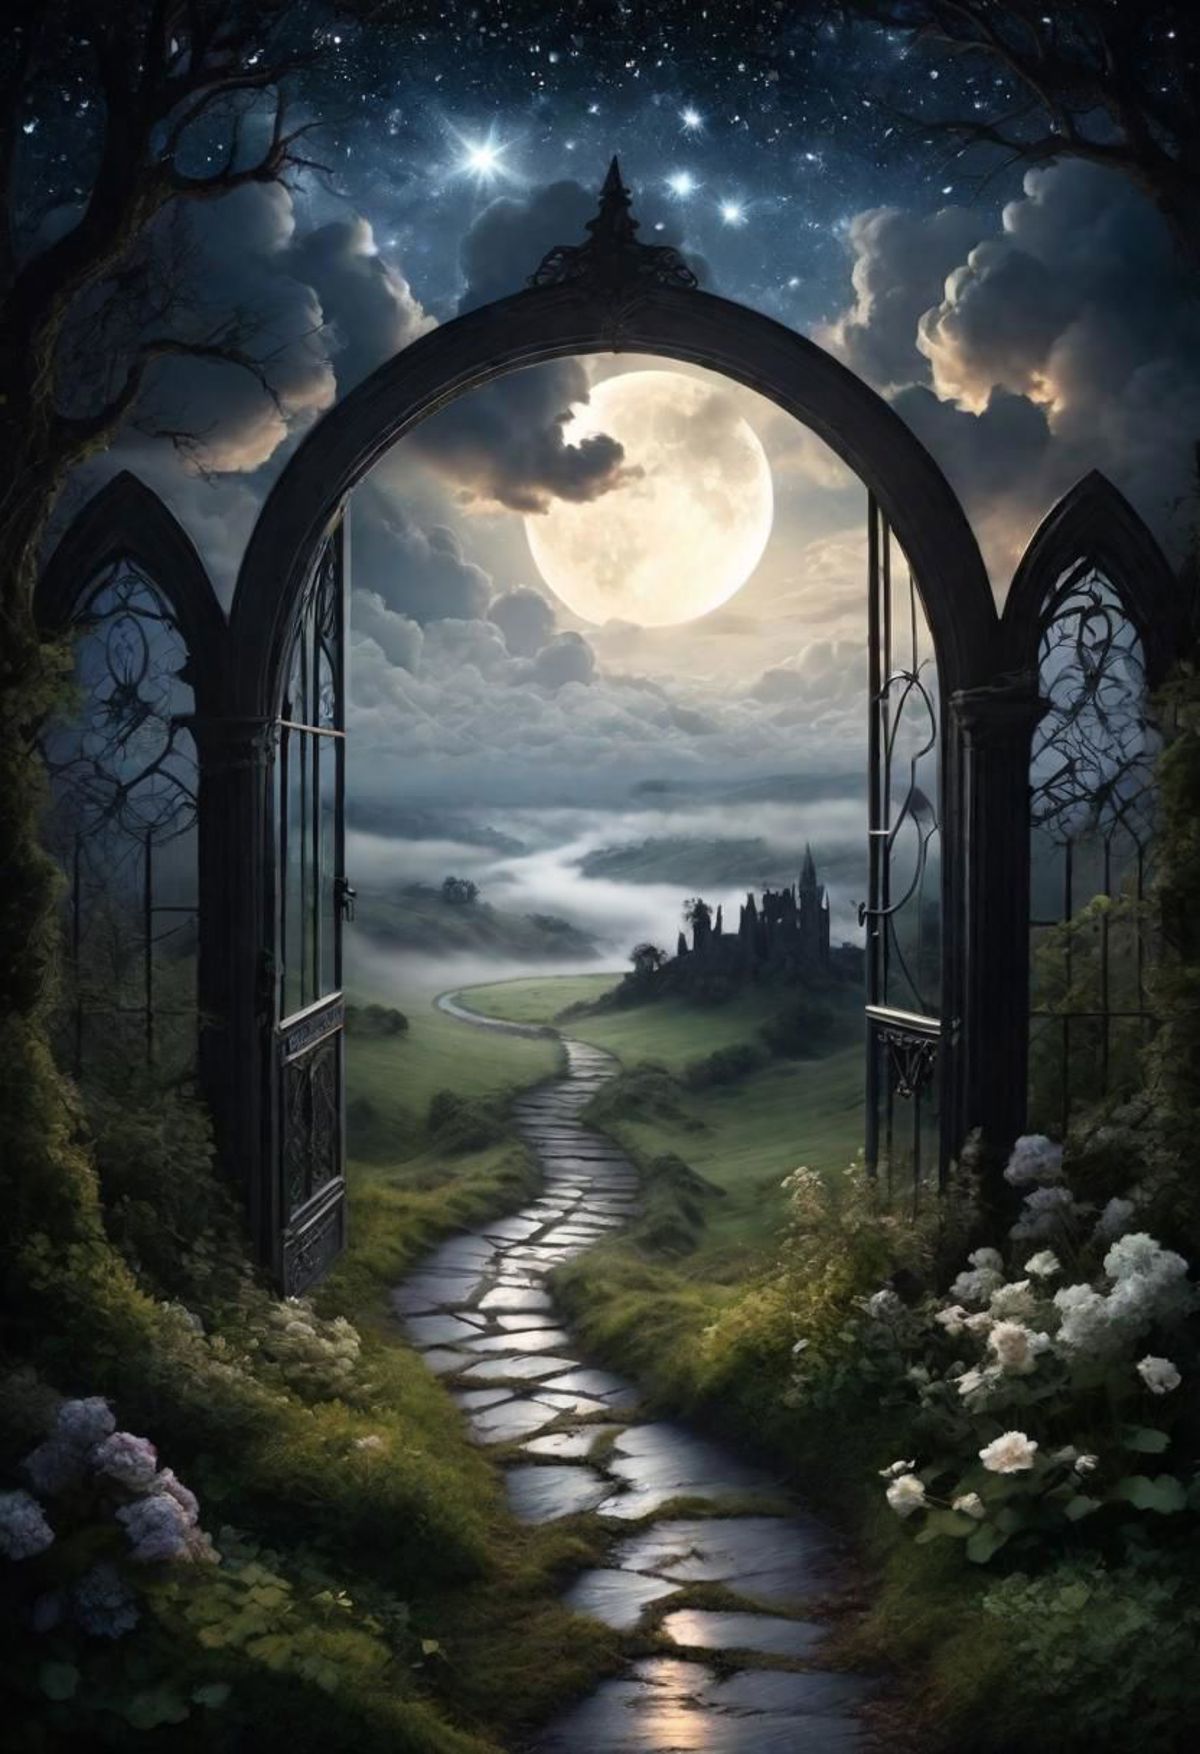 A painting of a castle with a full moon in the background, with a path leading to it.